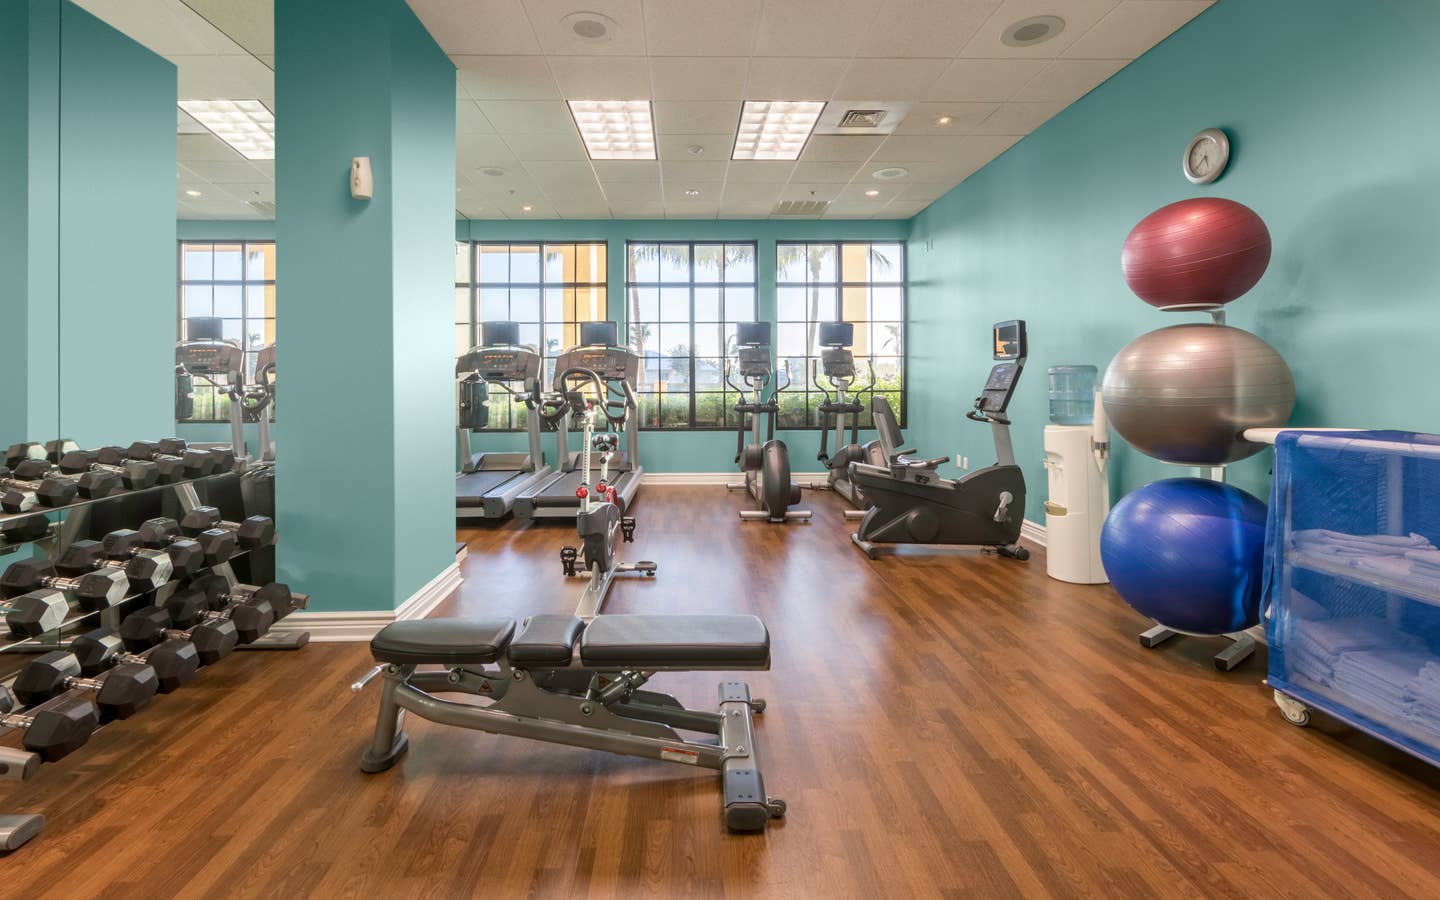 Fitness center with treadmills, yoga balls and weights at Sunset Cove Resort in Marco Island, FL.